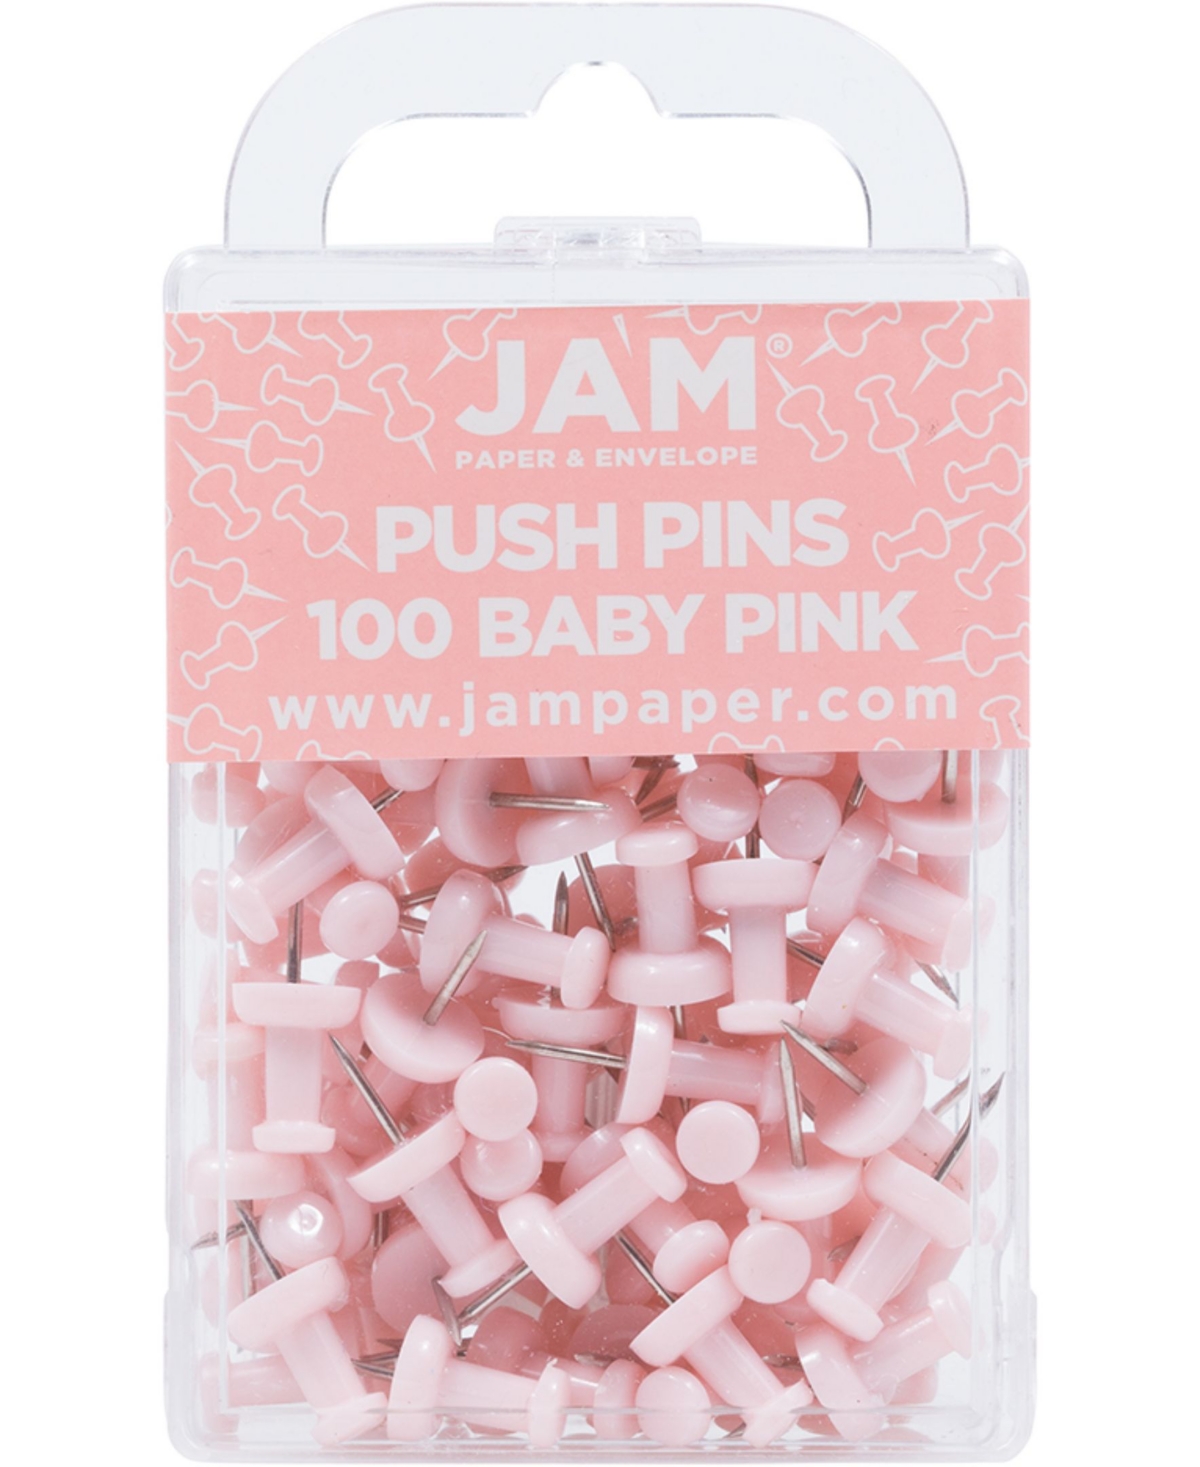 Jam Paper Colorful Push Pins In Baby Pink